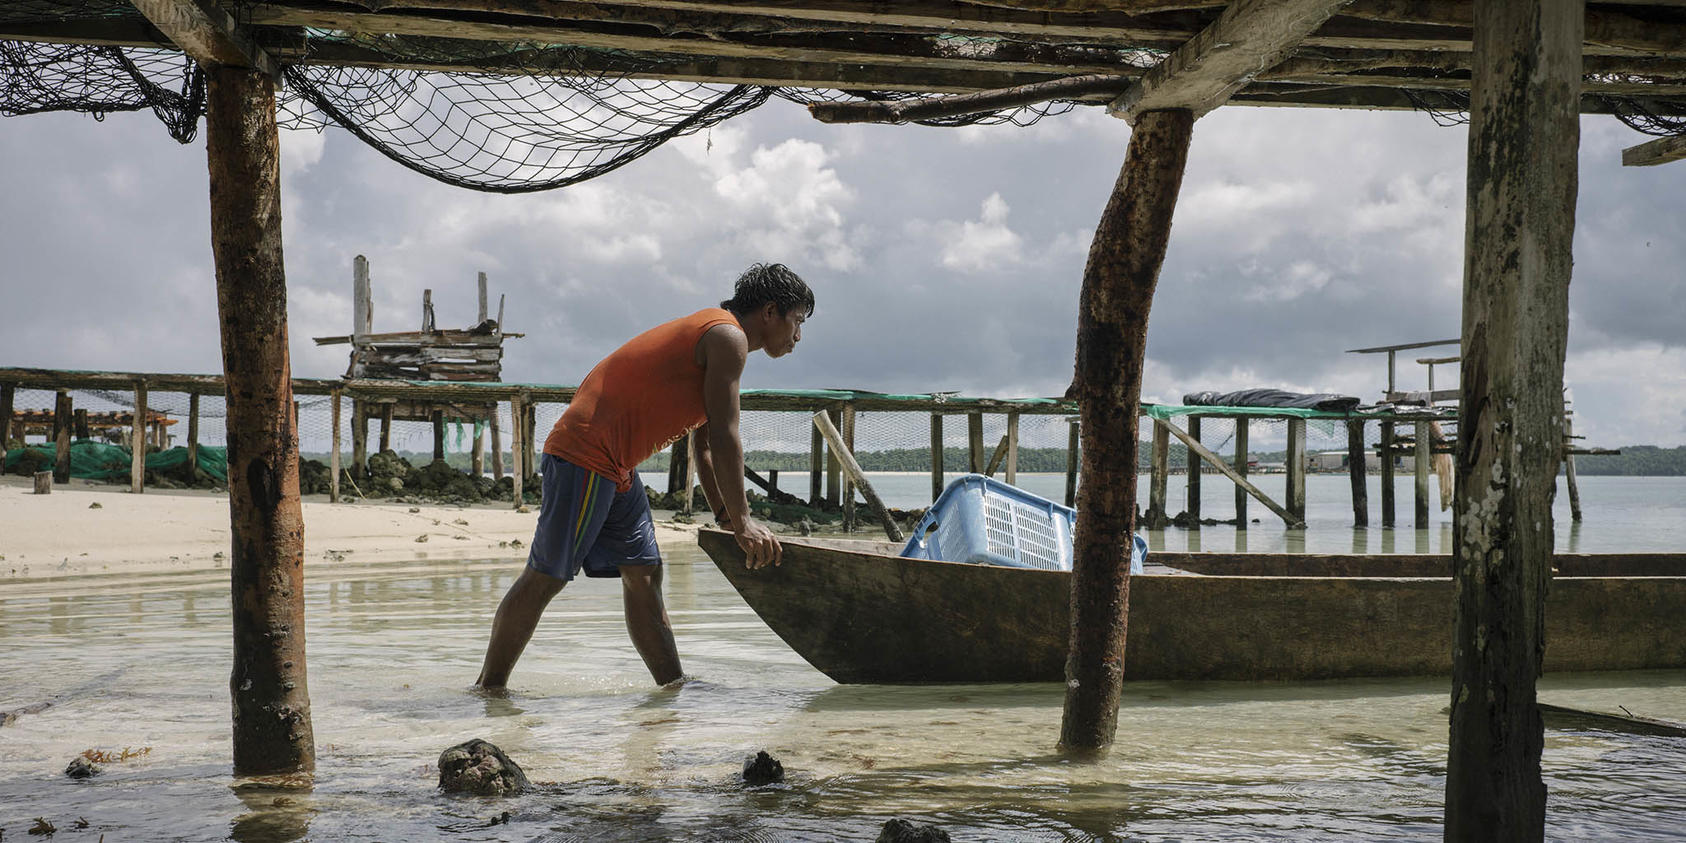 A man unloads seaweed, Solomon Islands, June 2018. As China seeks to expand its influence in the Pacific Islands, those nations want their interests, like addressing climate change, to be central to Beijing’s engagement. (Adam Ferguson/The New York Times)